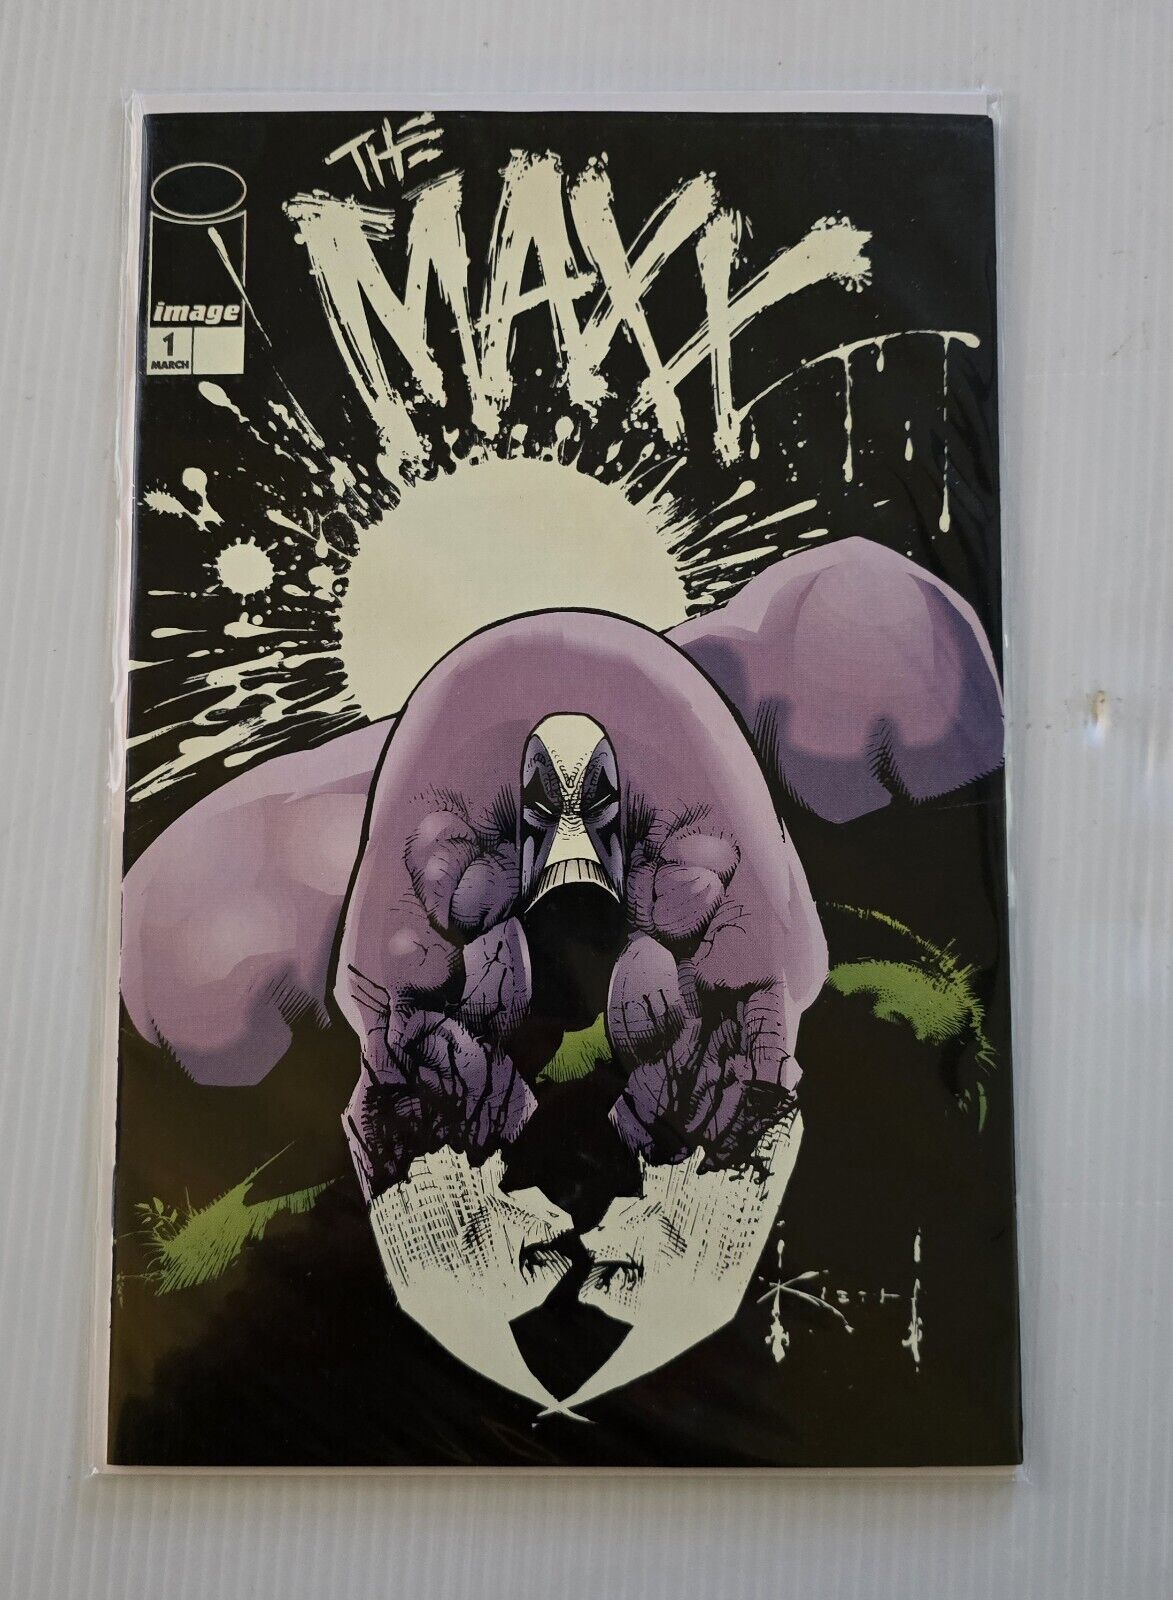 THE MAXX #1 GLOW IN THE DARK VARIANT EDITION SAM KEITH 1993 IMAGE COMIC